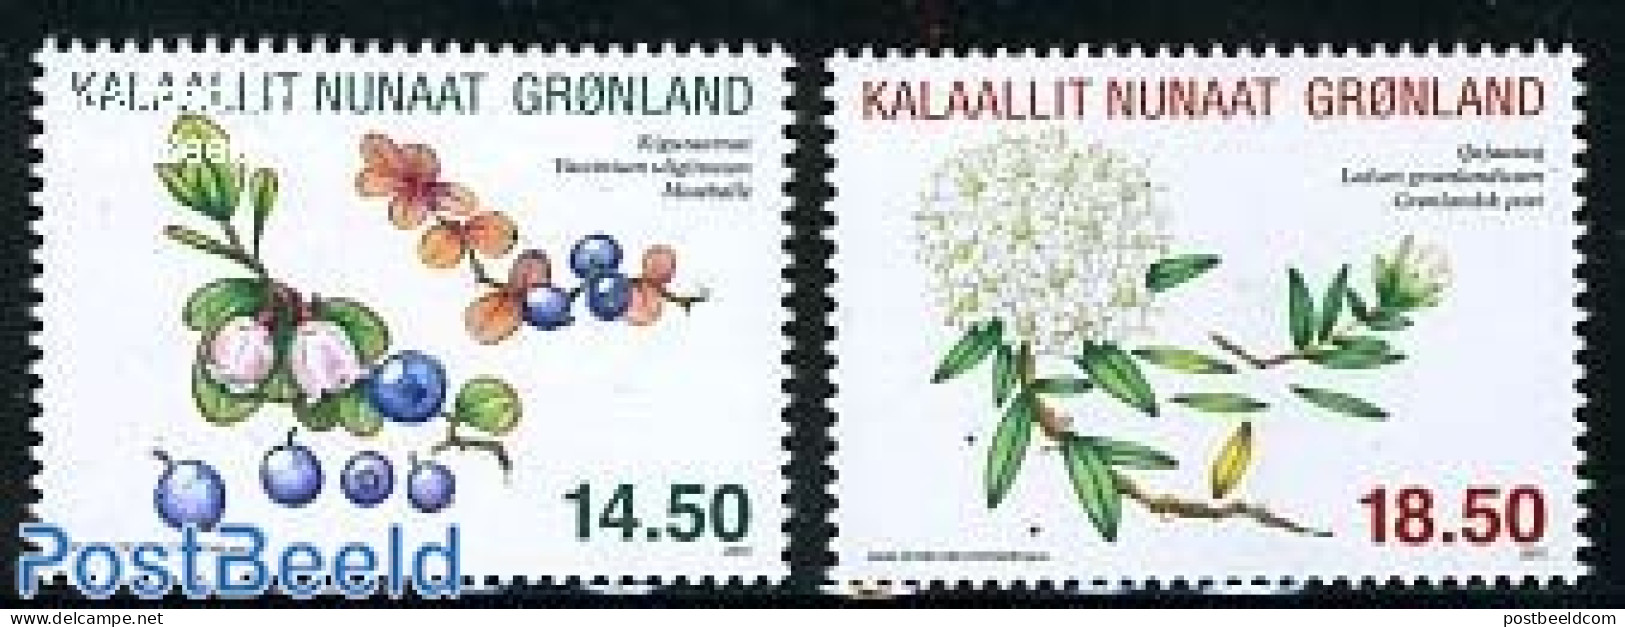 Greenland 2012 Herbs 2v, Mint NH, Nature - Flowers & Plants - Nuevos